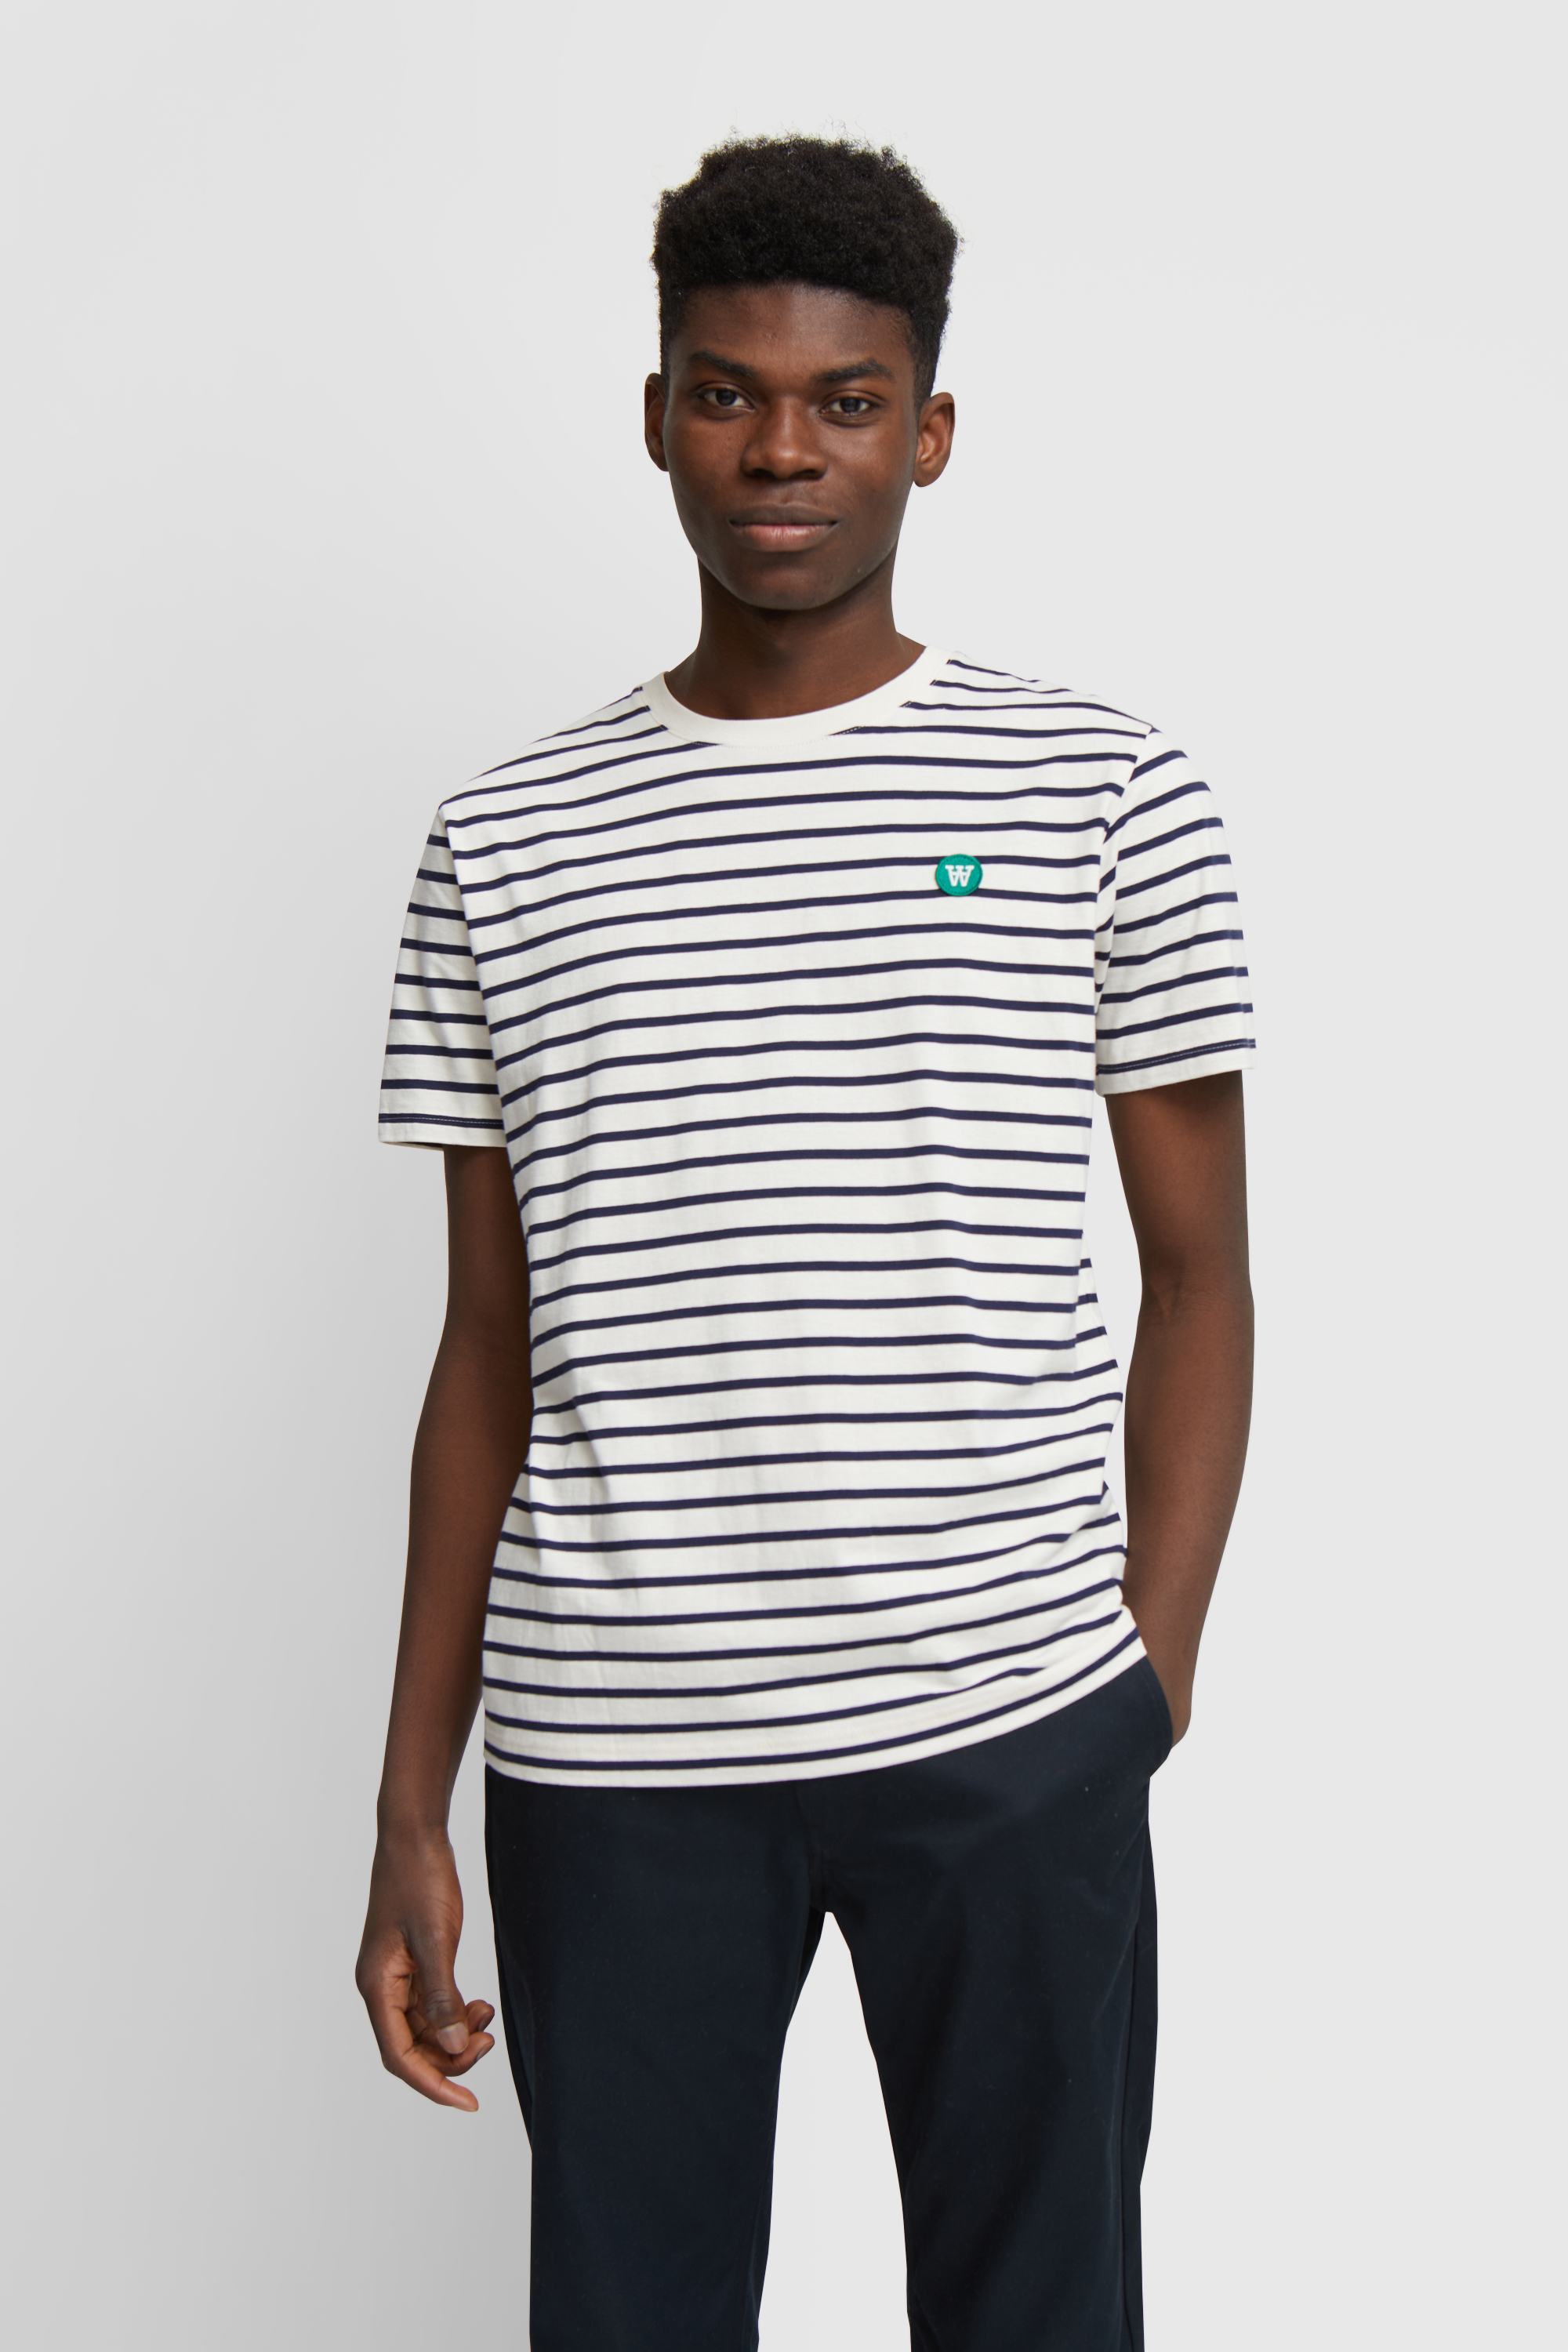 Double A by Wood Ace T-shirt stripes